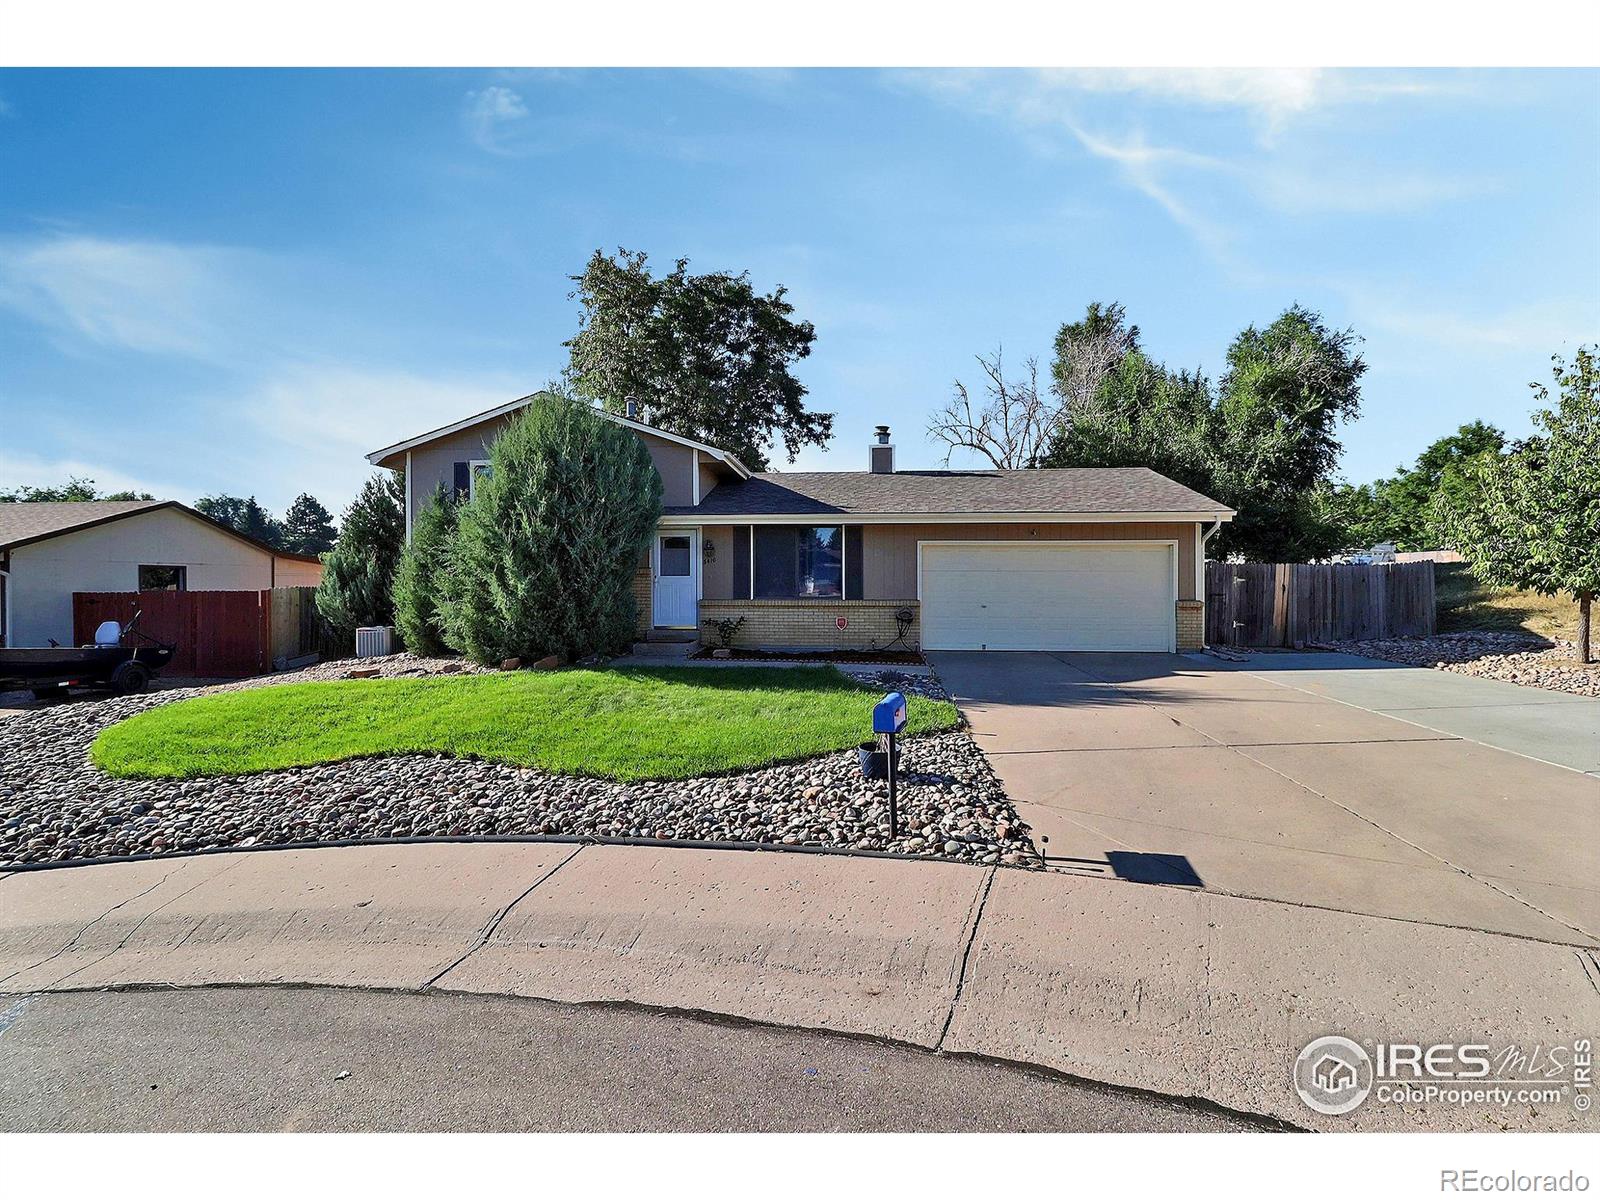 3410 W 17th St Rd, greeley MLS: 456789996119 Beds: 3 Baths: 2 Price: $373,000